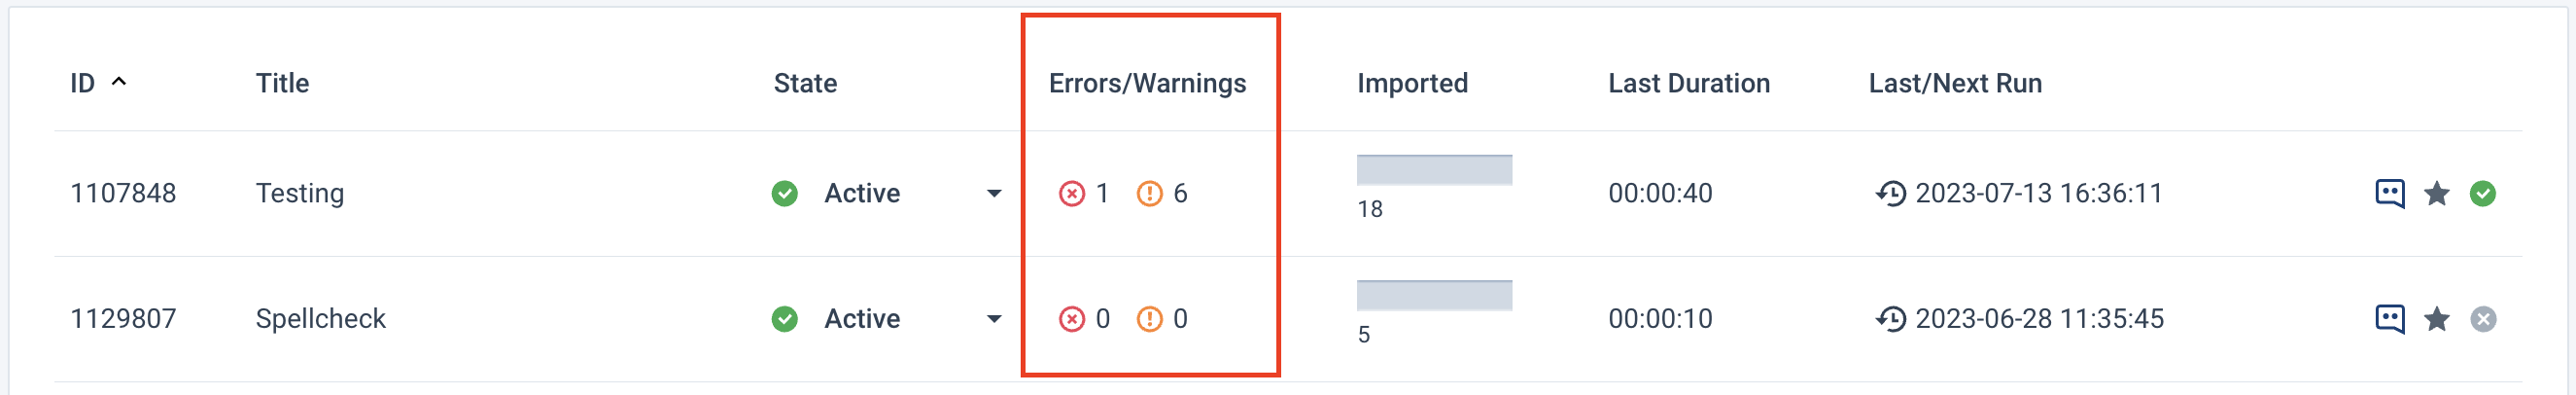 number of error and warnings